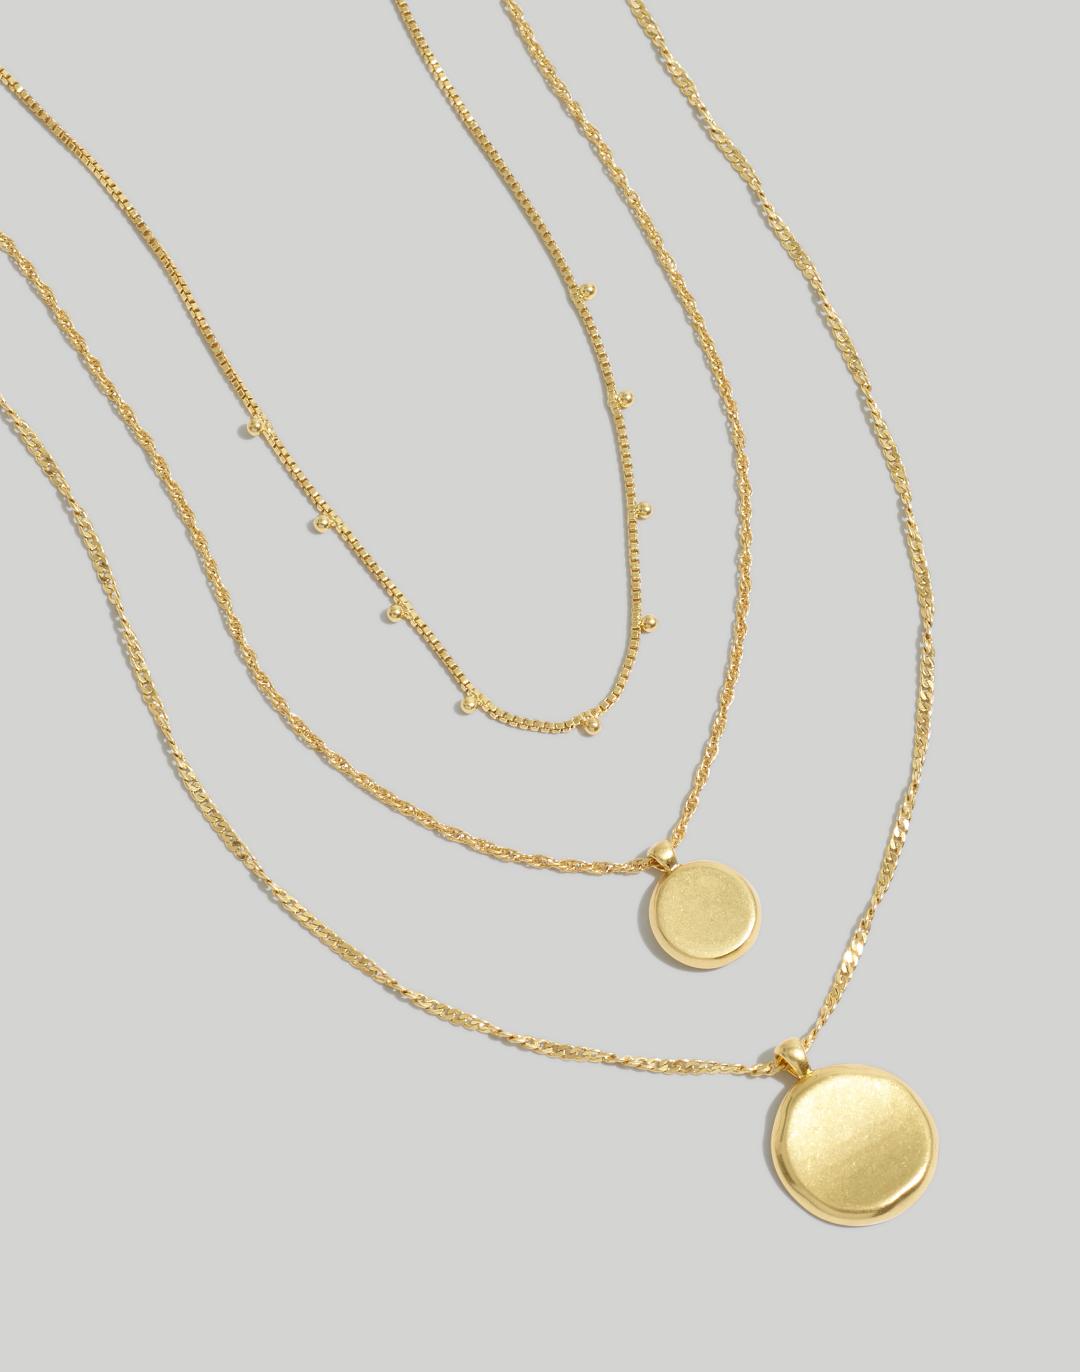 Necklaces Women's Coin Necklace Set | Madewell